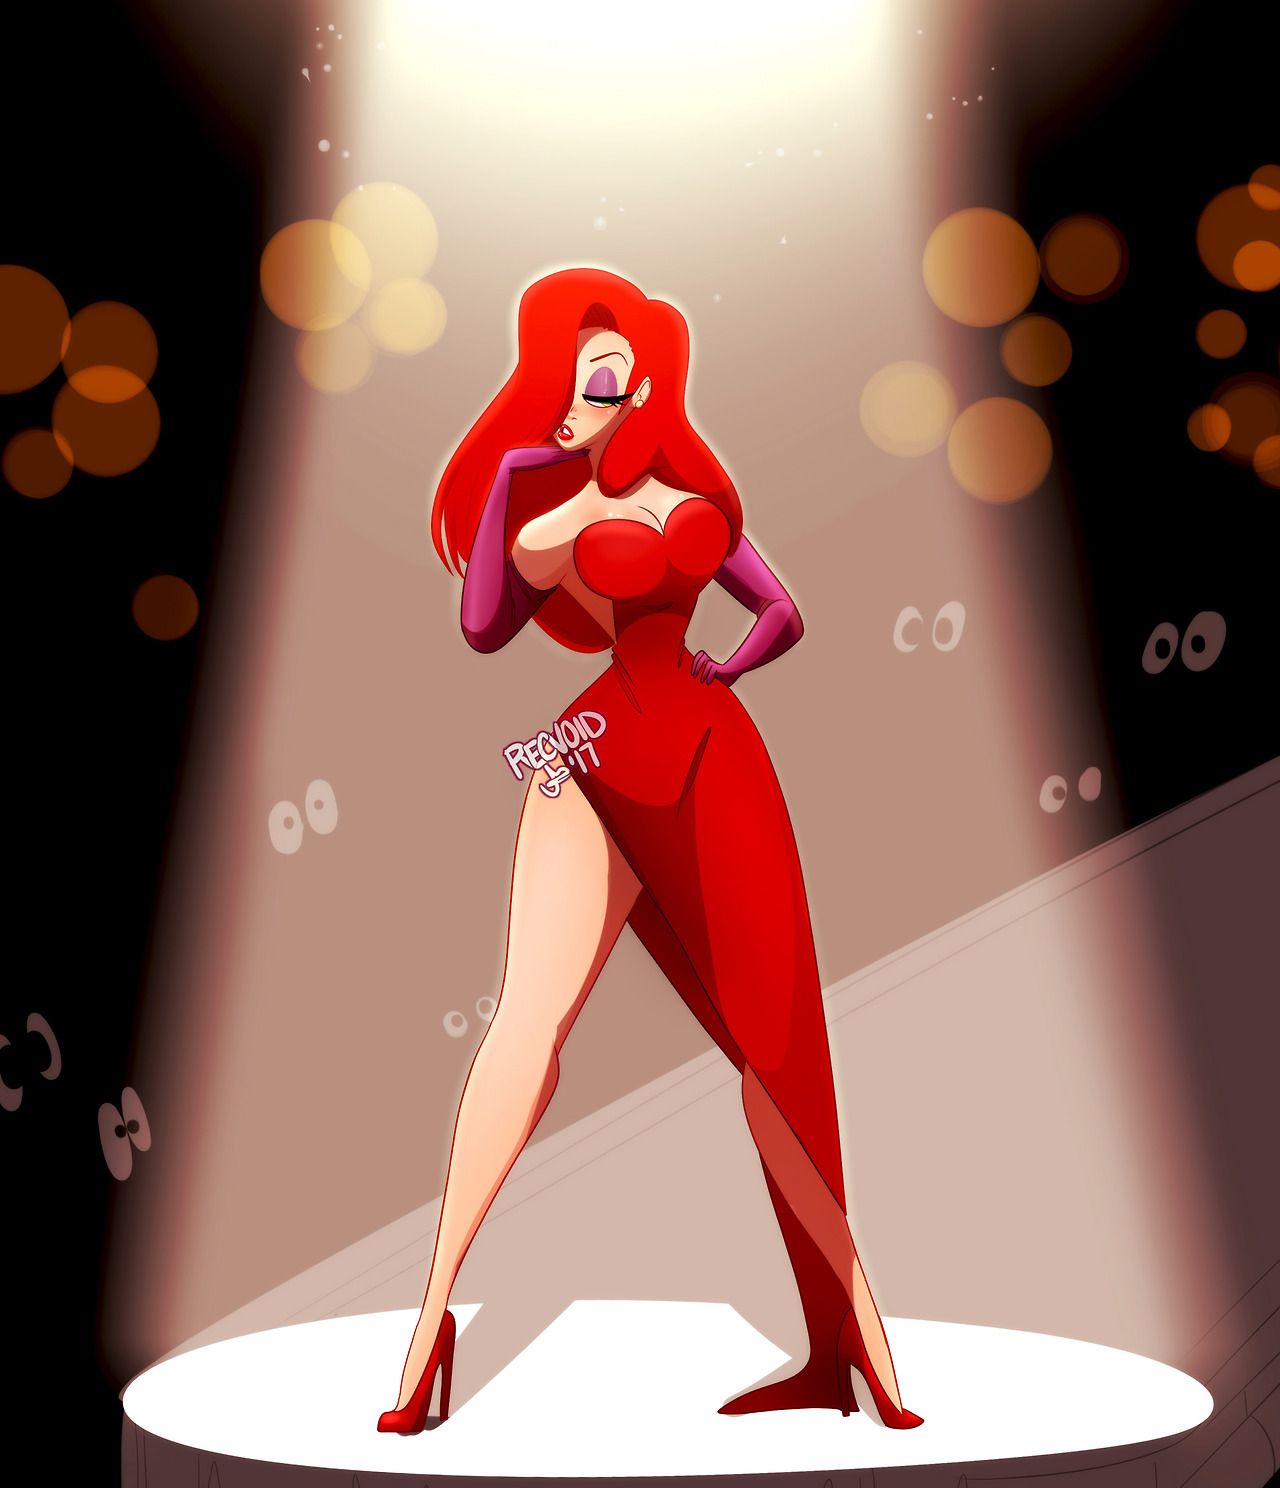 recvoid: I was rewatching Who Framed Roger Rabbit and ended up drawing Jessica because